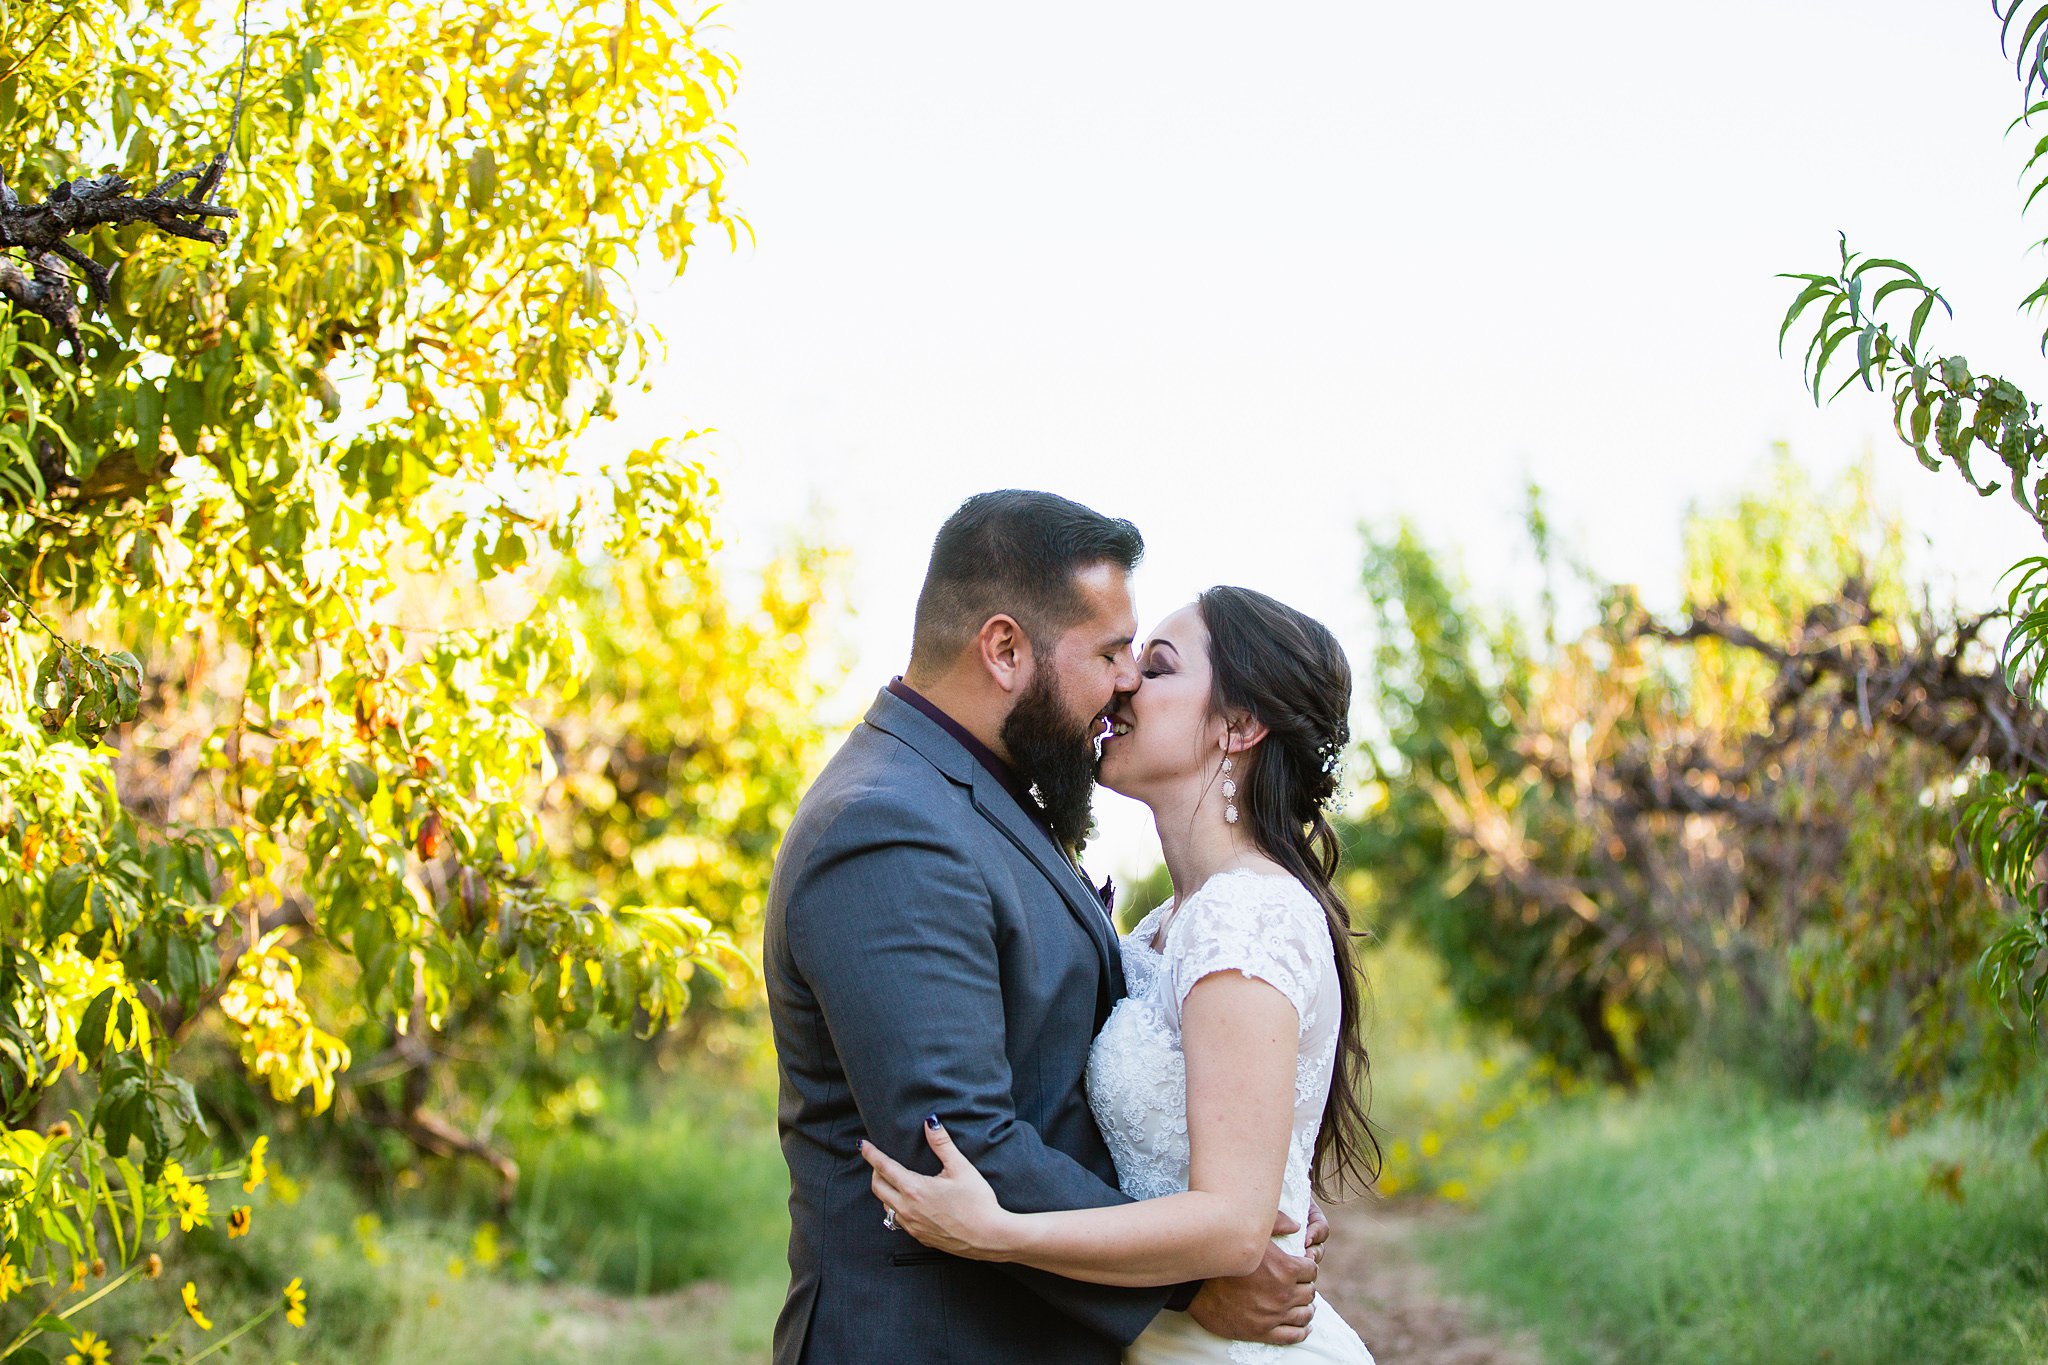 Bride and groom sharing a kiss in the orchard at the Schnepf Farm's Farmhouse by Phoenix wedding photographers PMA Photography.